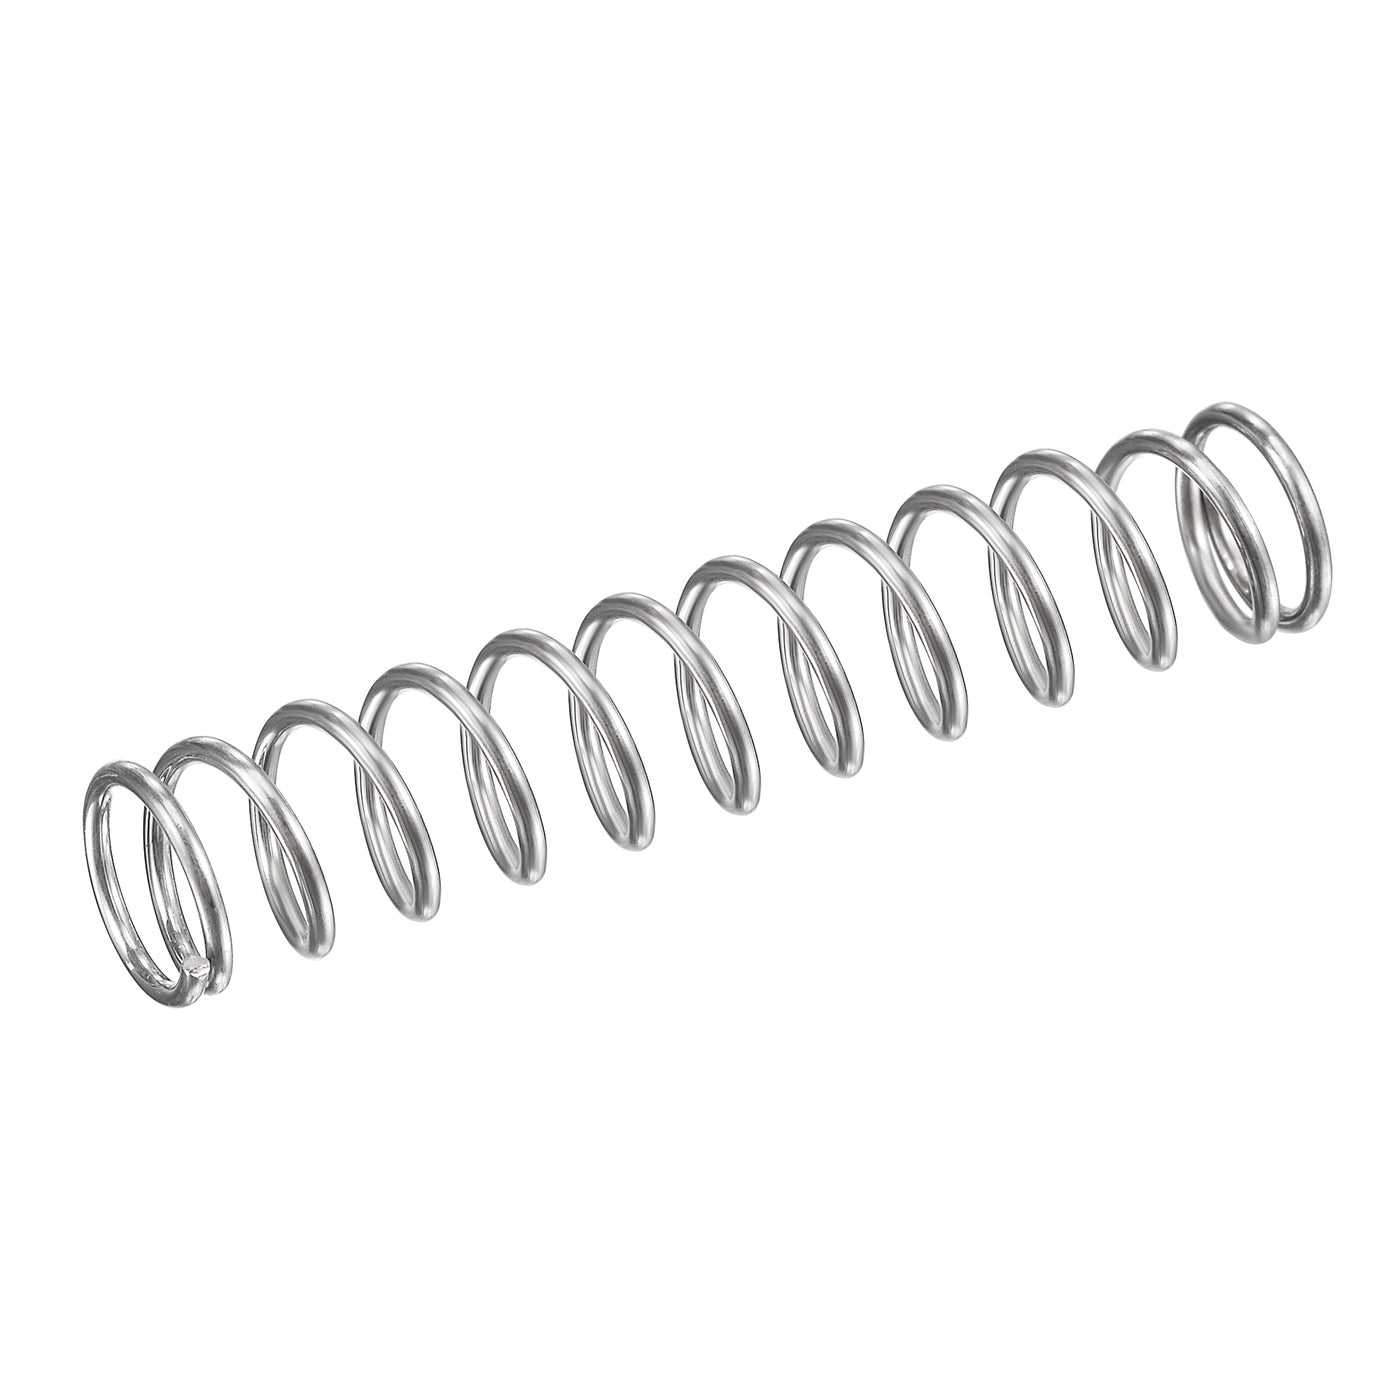 uxcell Uxcell 9mmx1mmx45mm 304 Stainless Steel Compression Spring 31.4N Load Capacity 20pcs